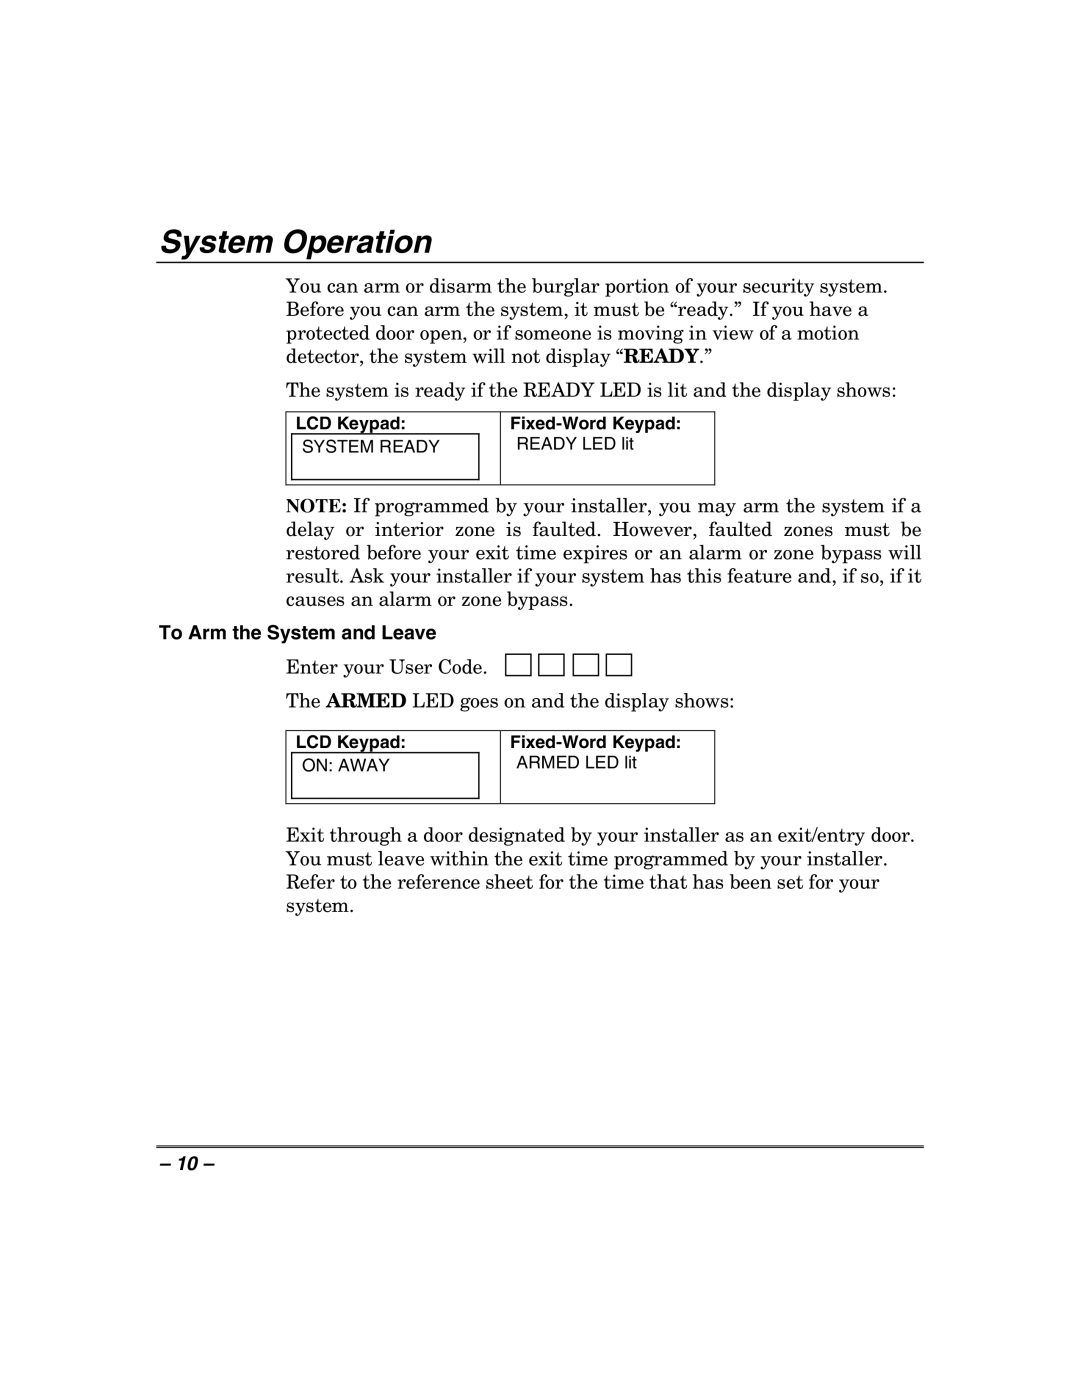 Honeywell 408EU manual System Operation, To Arm the System and Leave 